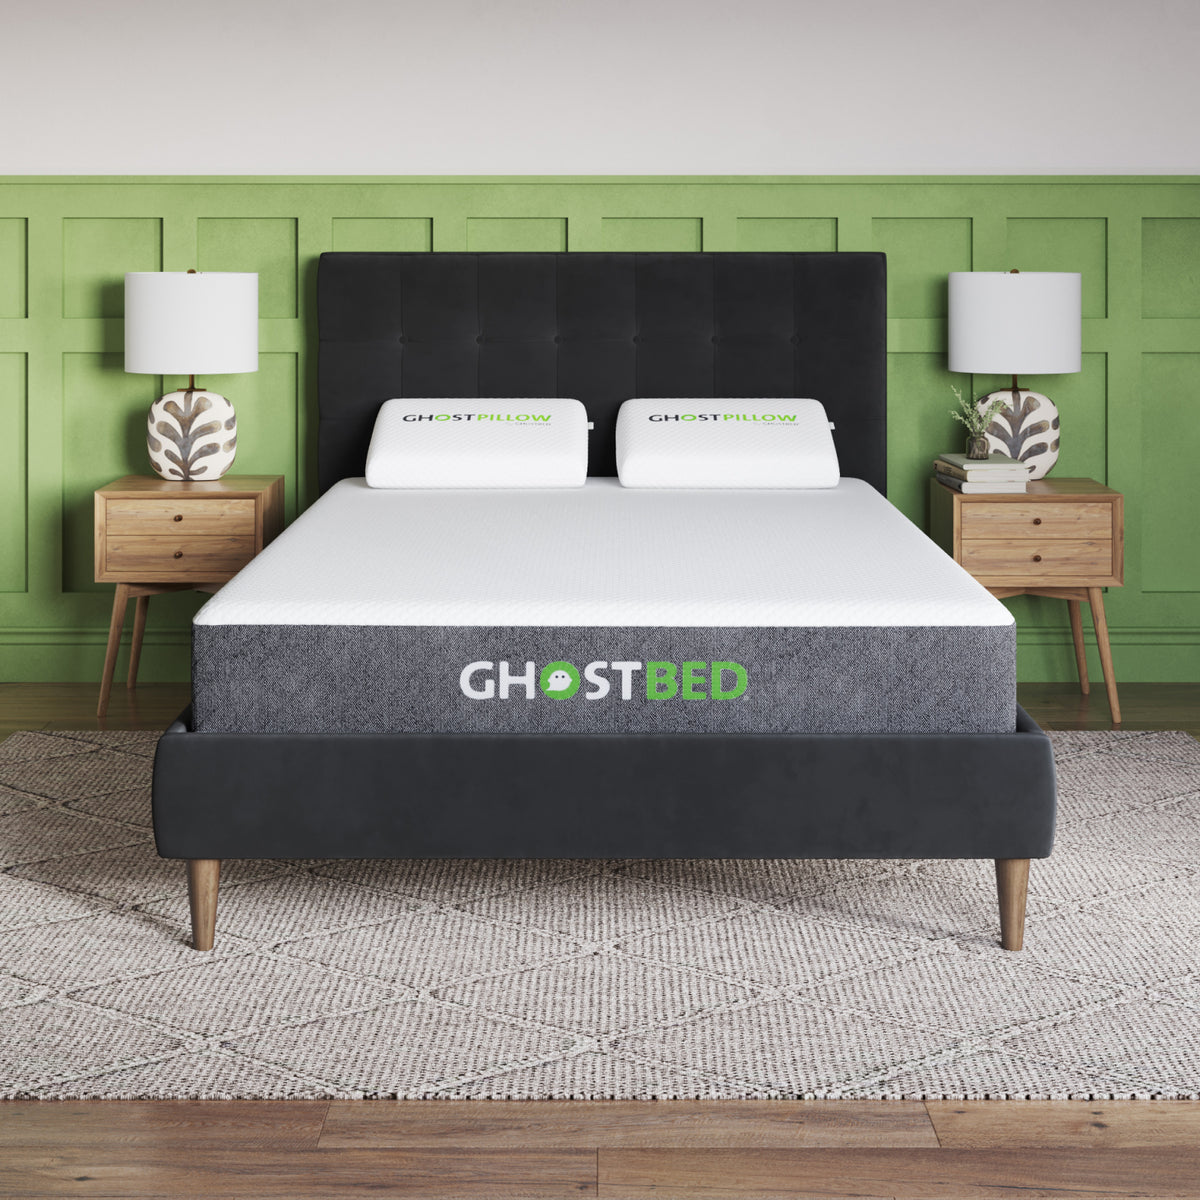 www.ghostbed.com